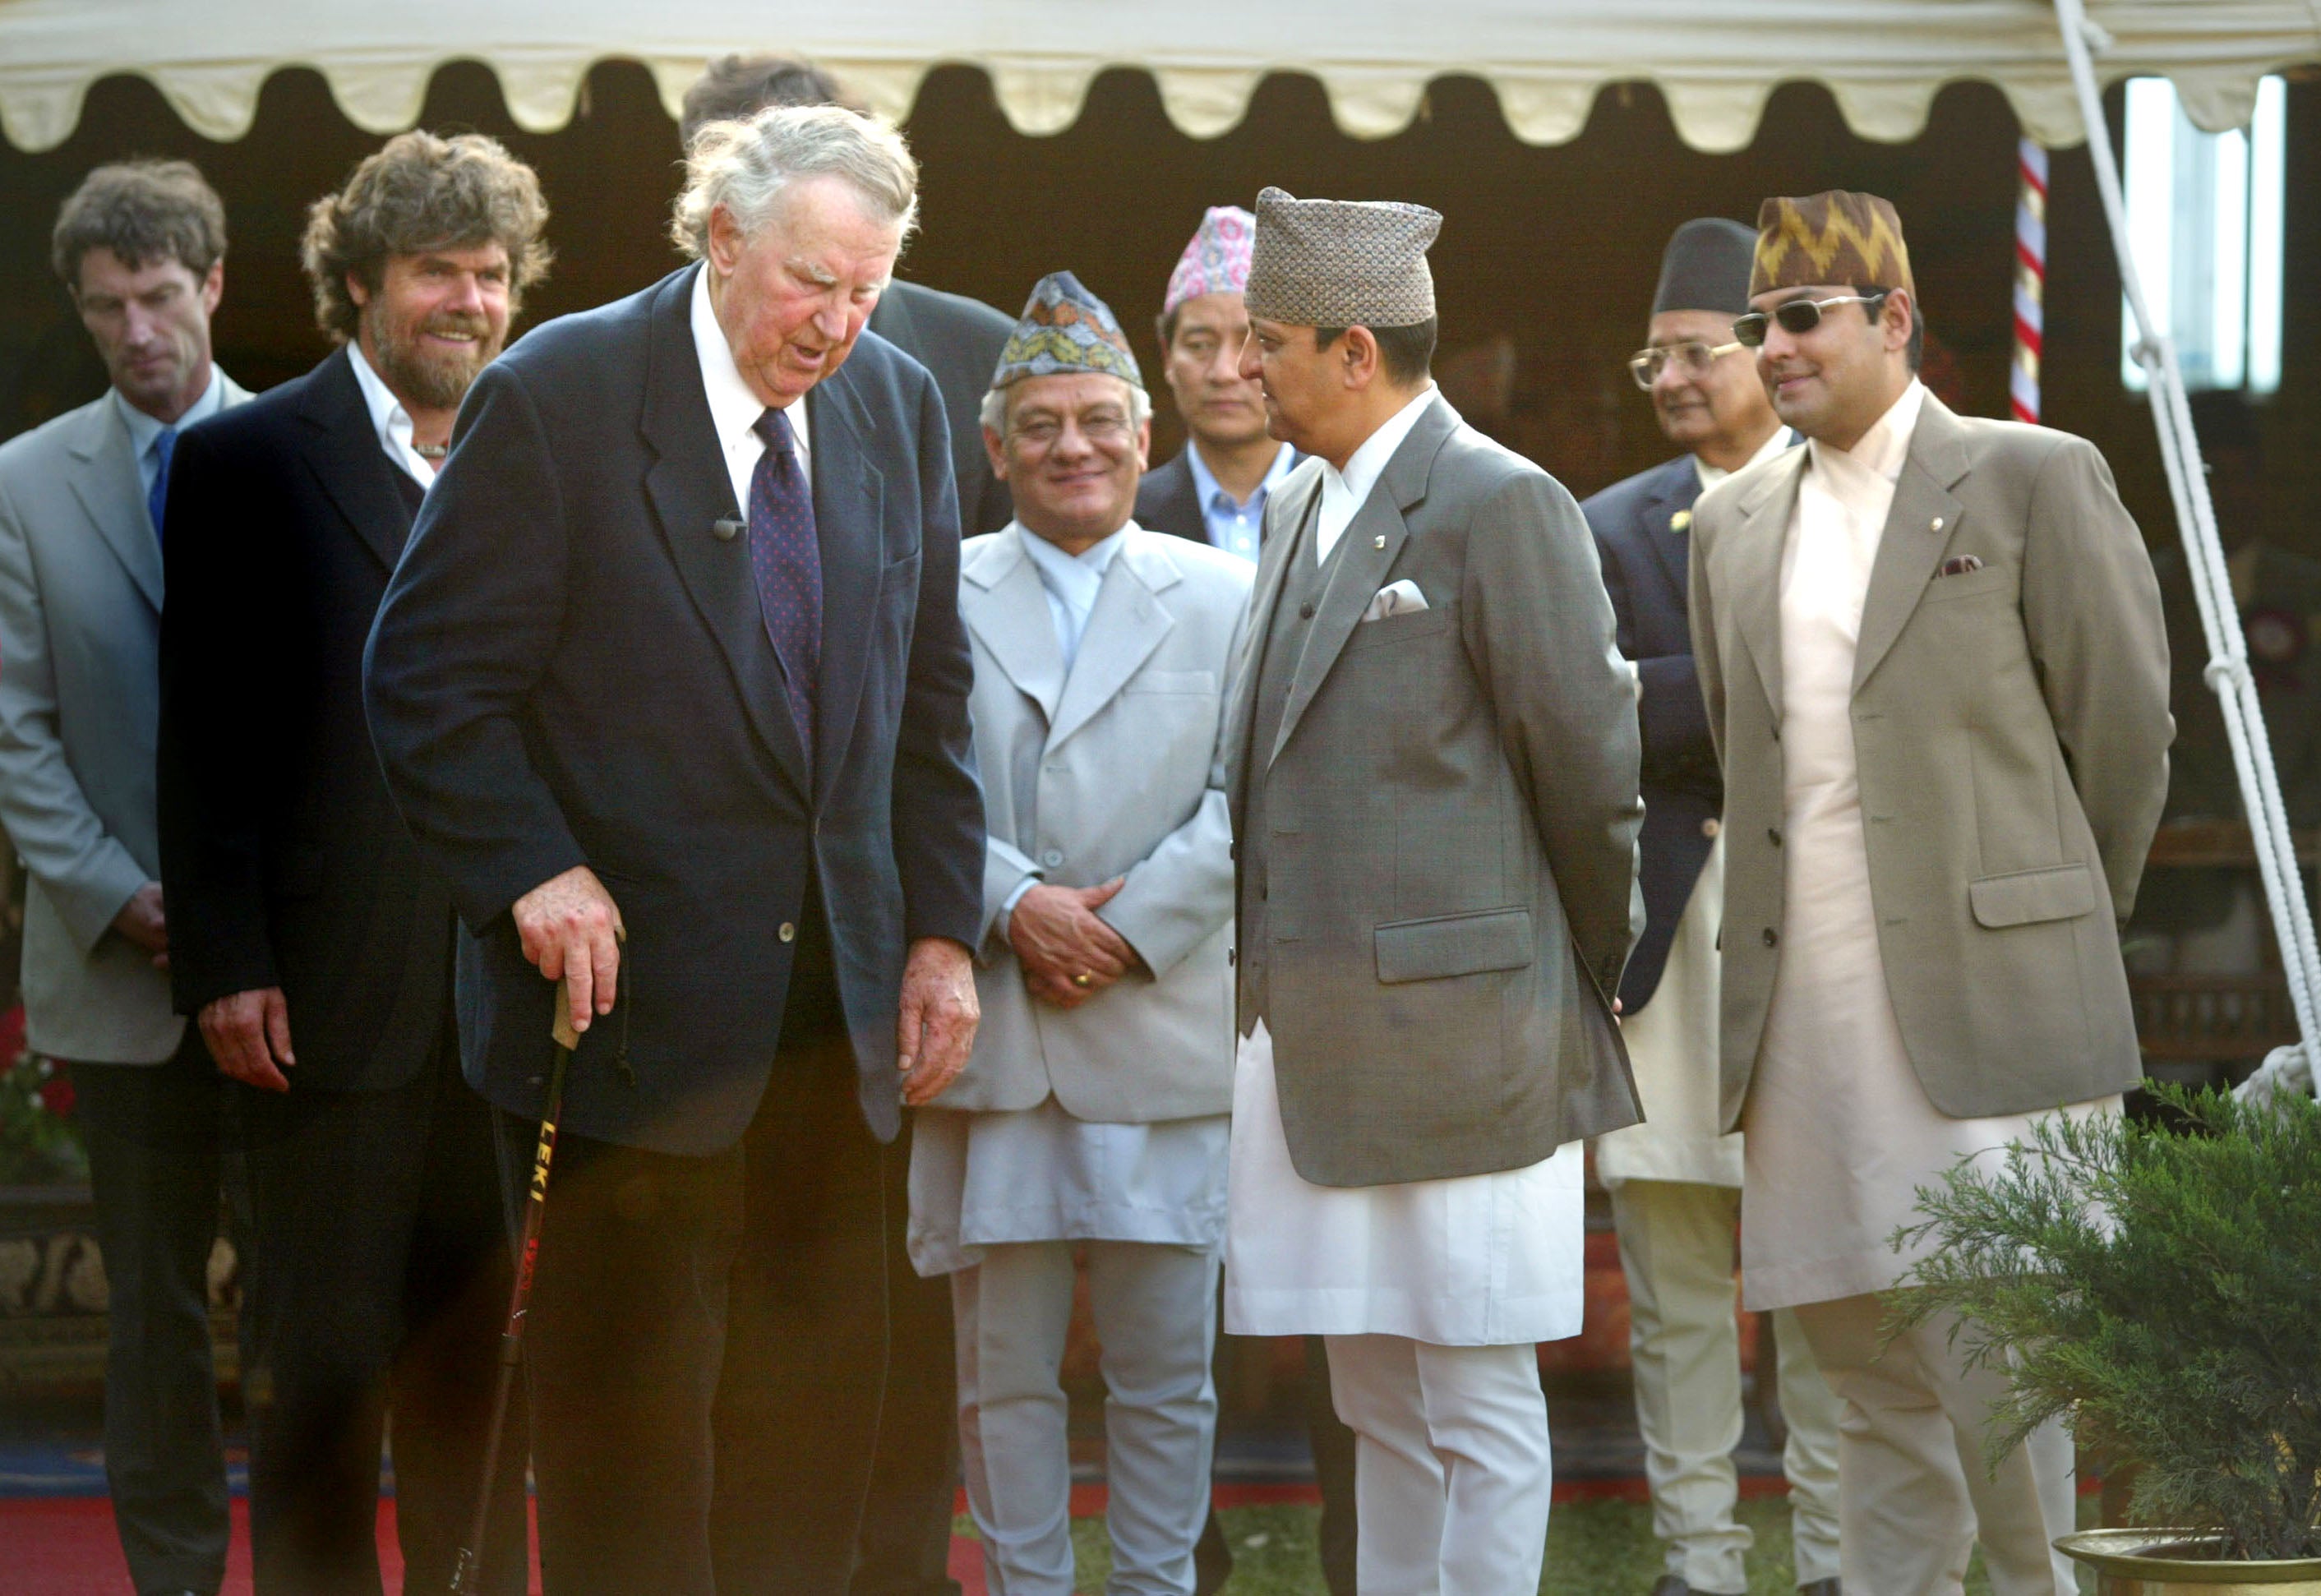 Edmund Hillary (third left) and Messner (second left) meet with Nepalese royalty during ceremonies celebrating the 50th anniversary of the conquest of Mount Everest, on 29 May 2003 in Kathmandu, Nepal